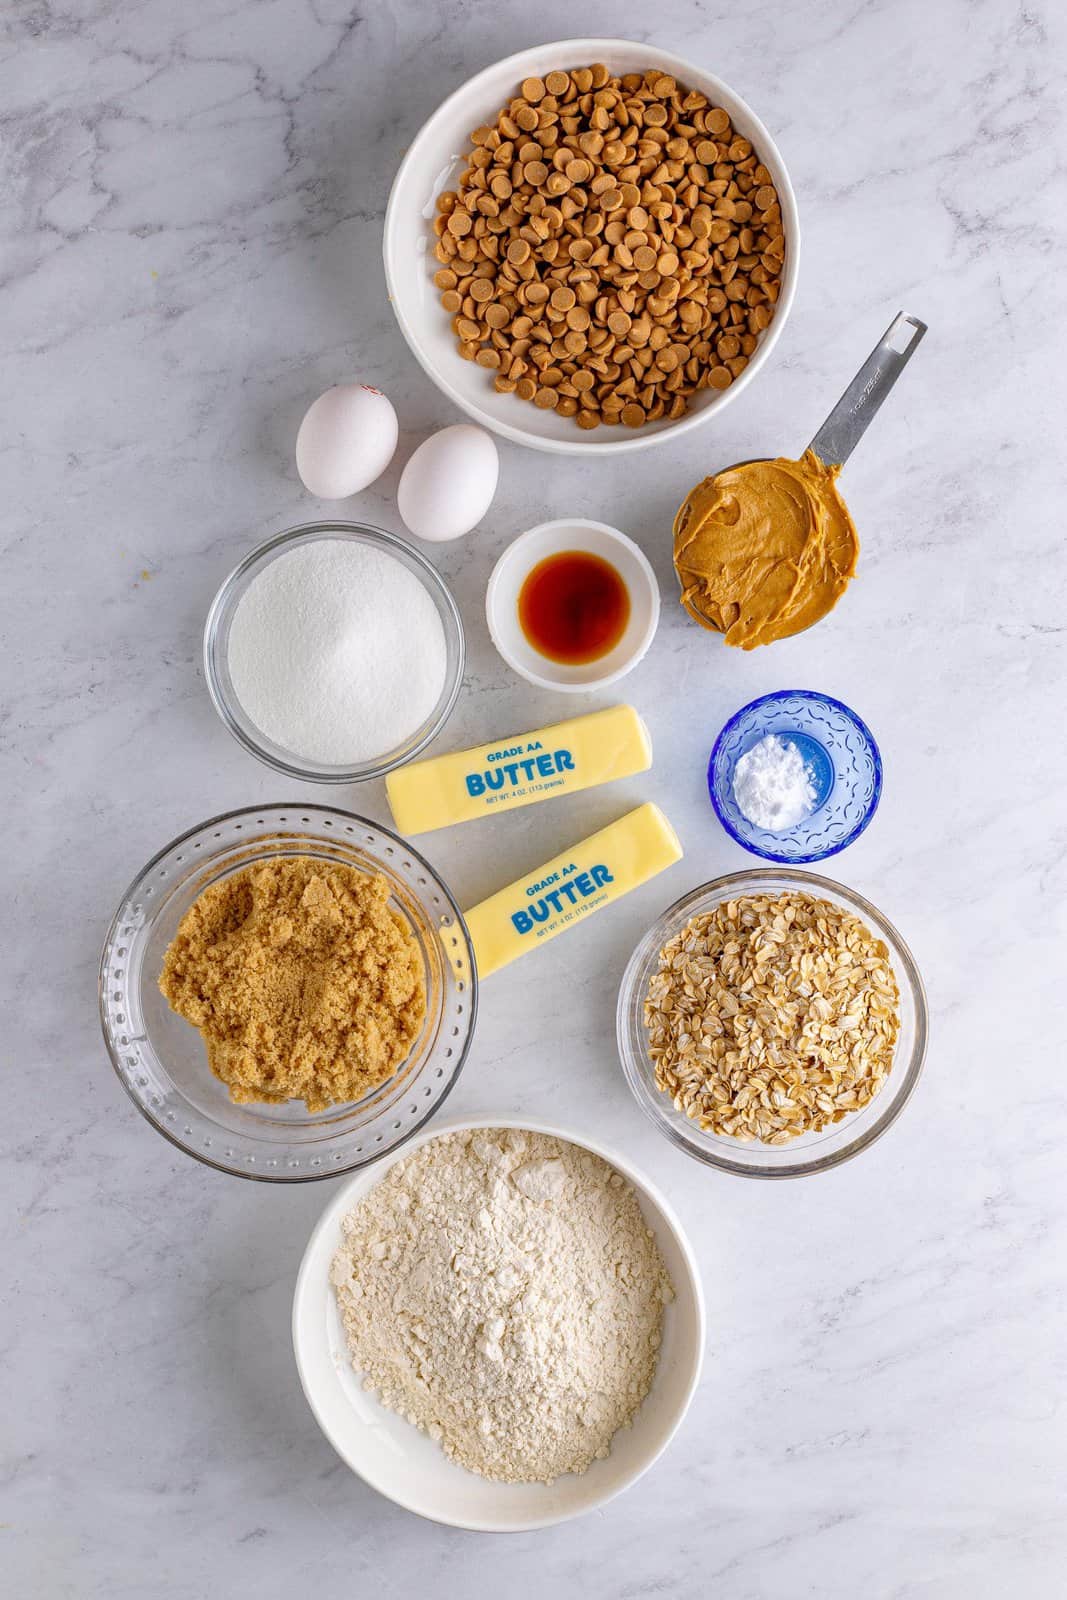 Ingredients needed: all-purpose flour, baking soda, creamy peanut butter, unsalted butter, light brown sugar, granulated sugar, eggs, vanilla extract, old fashioned oats and peanut butter chips.